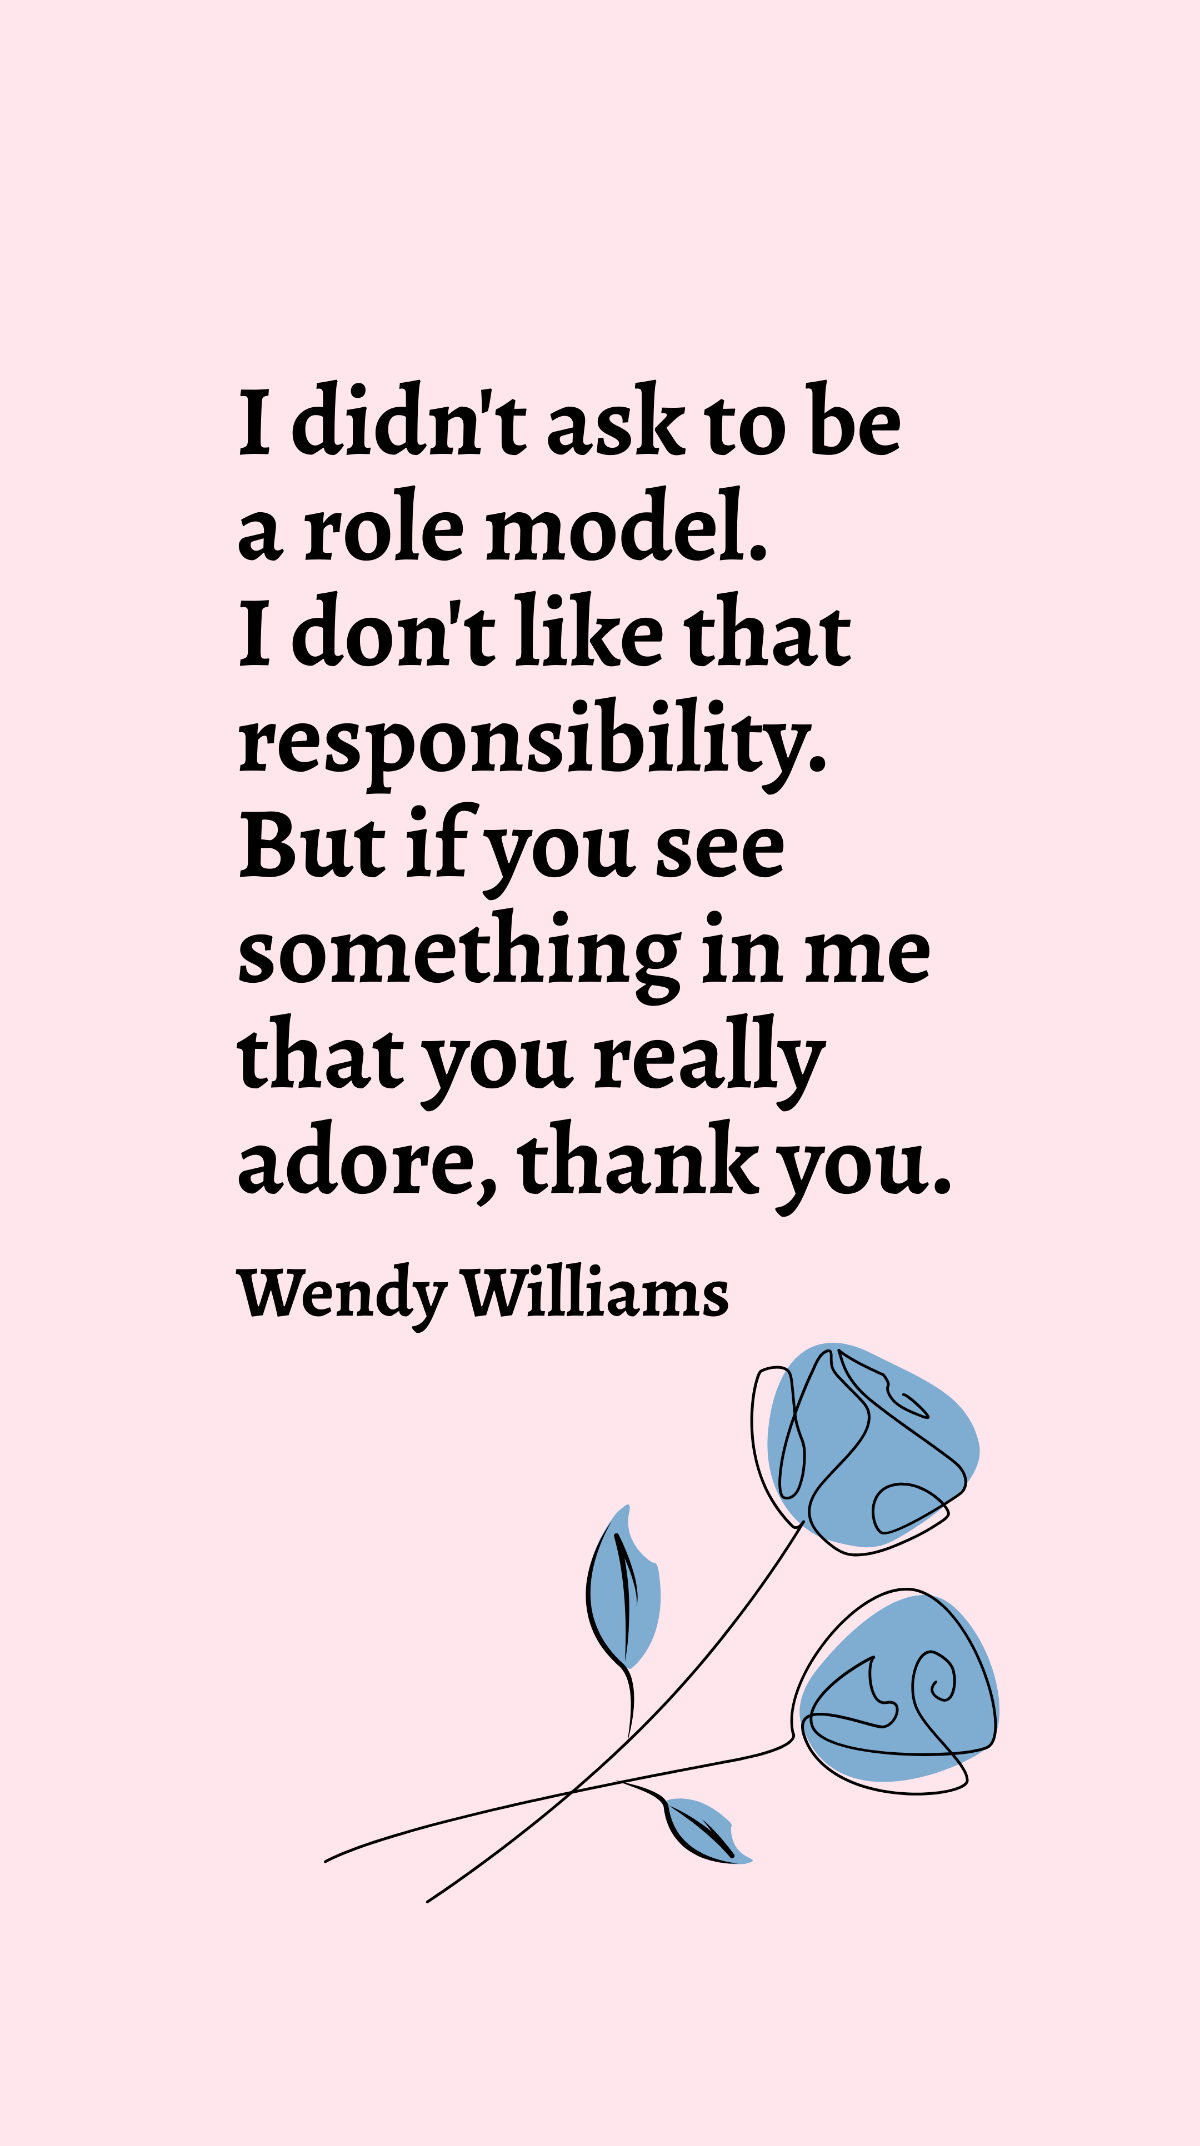 Wendy Williams - I didn't ask to be a role model. I don't like that responsibility. But if you see something in me that you really adore, thank you.